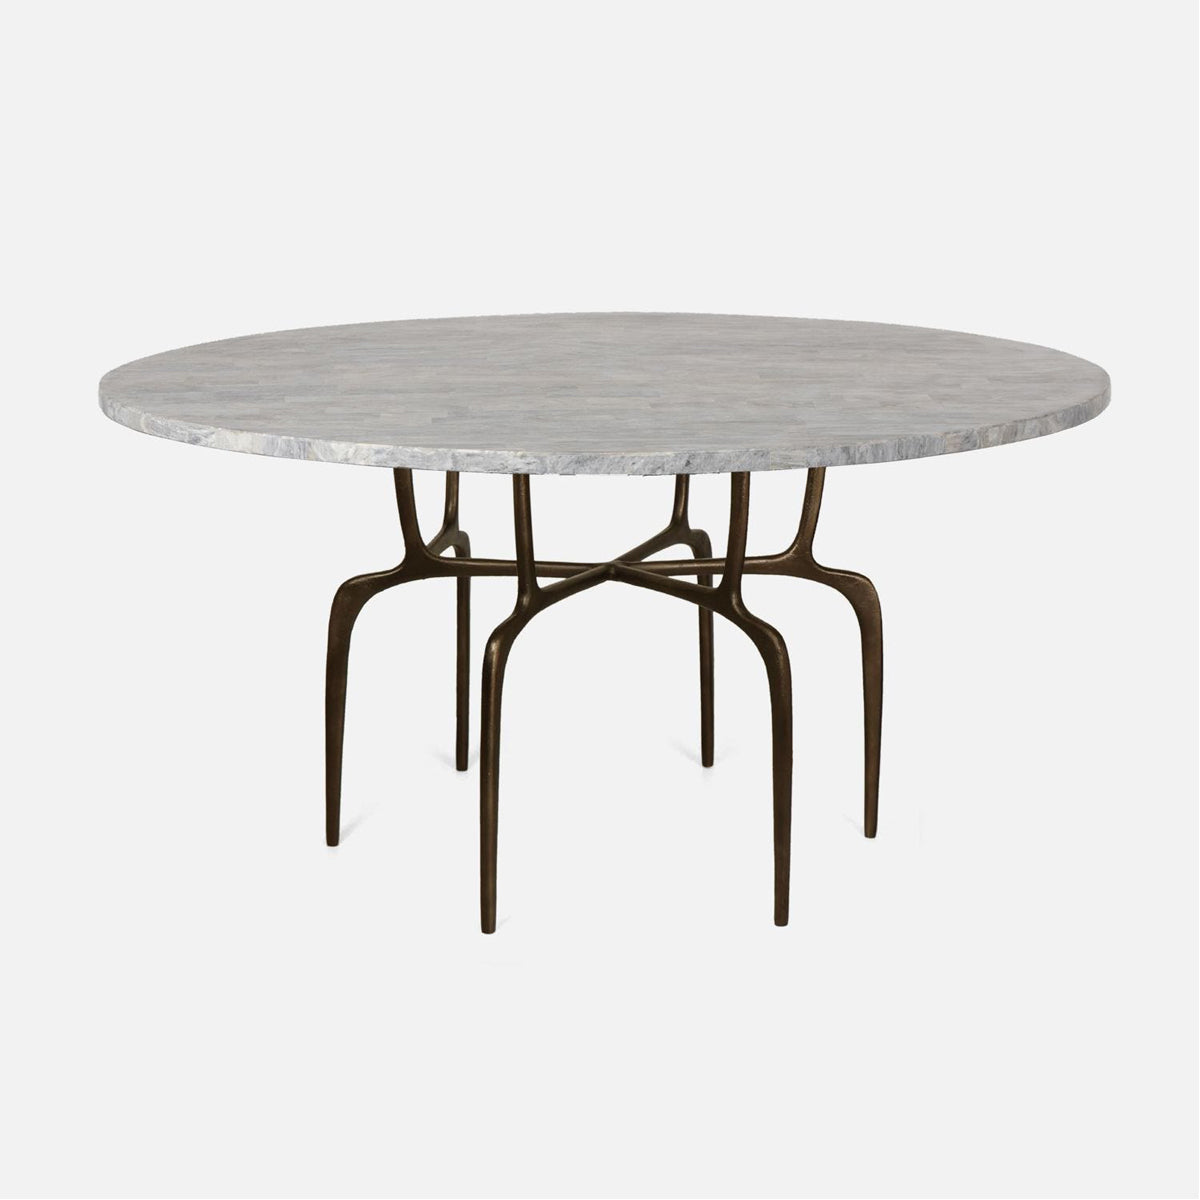 Made Goods Cyrano Metal Dining Table in Stone